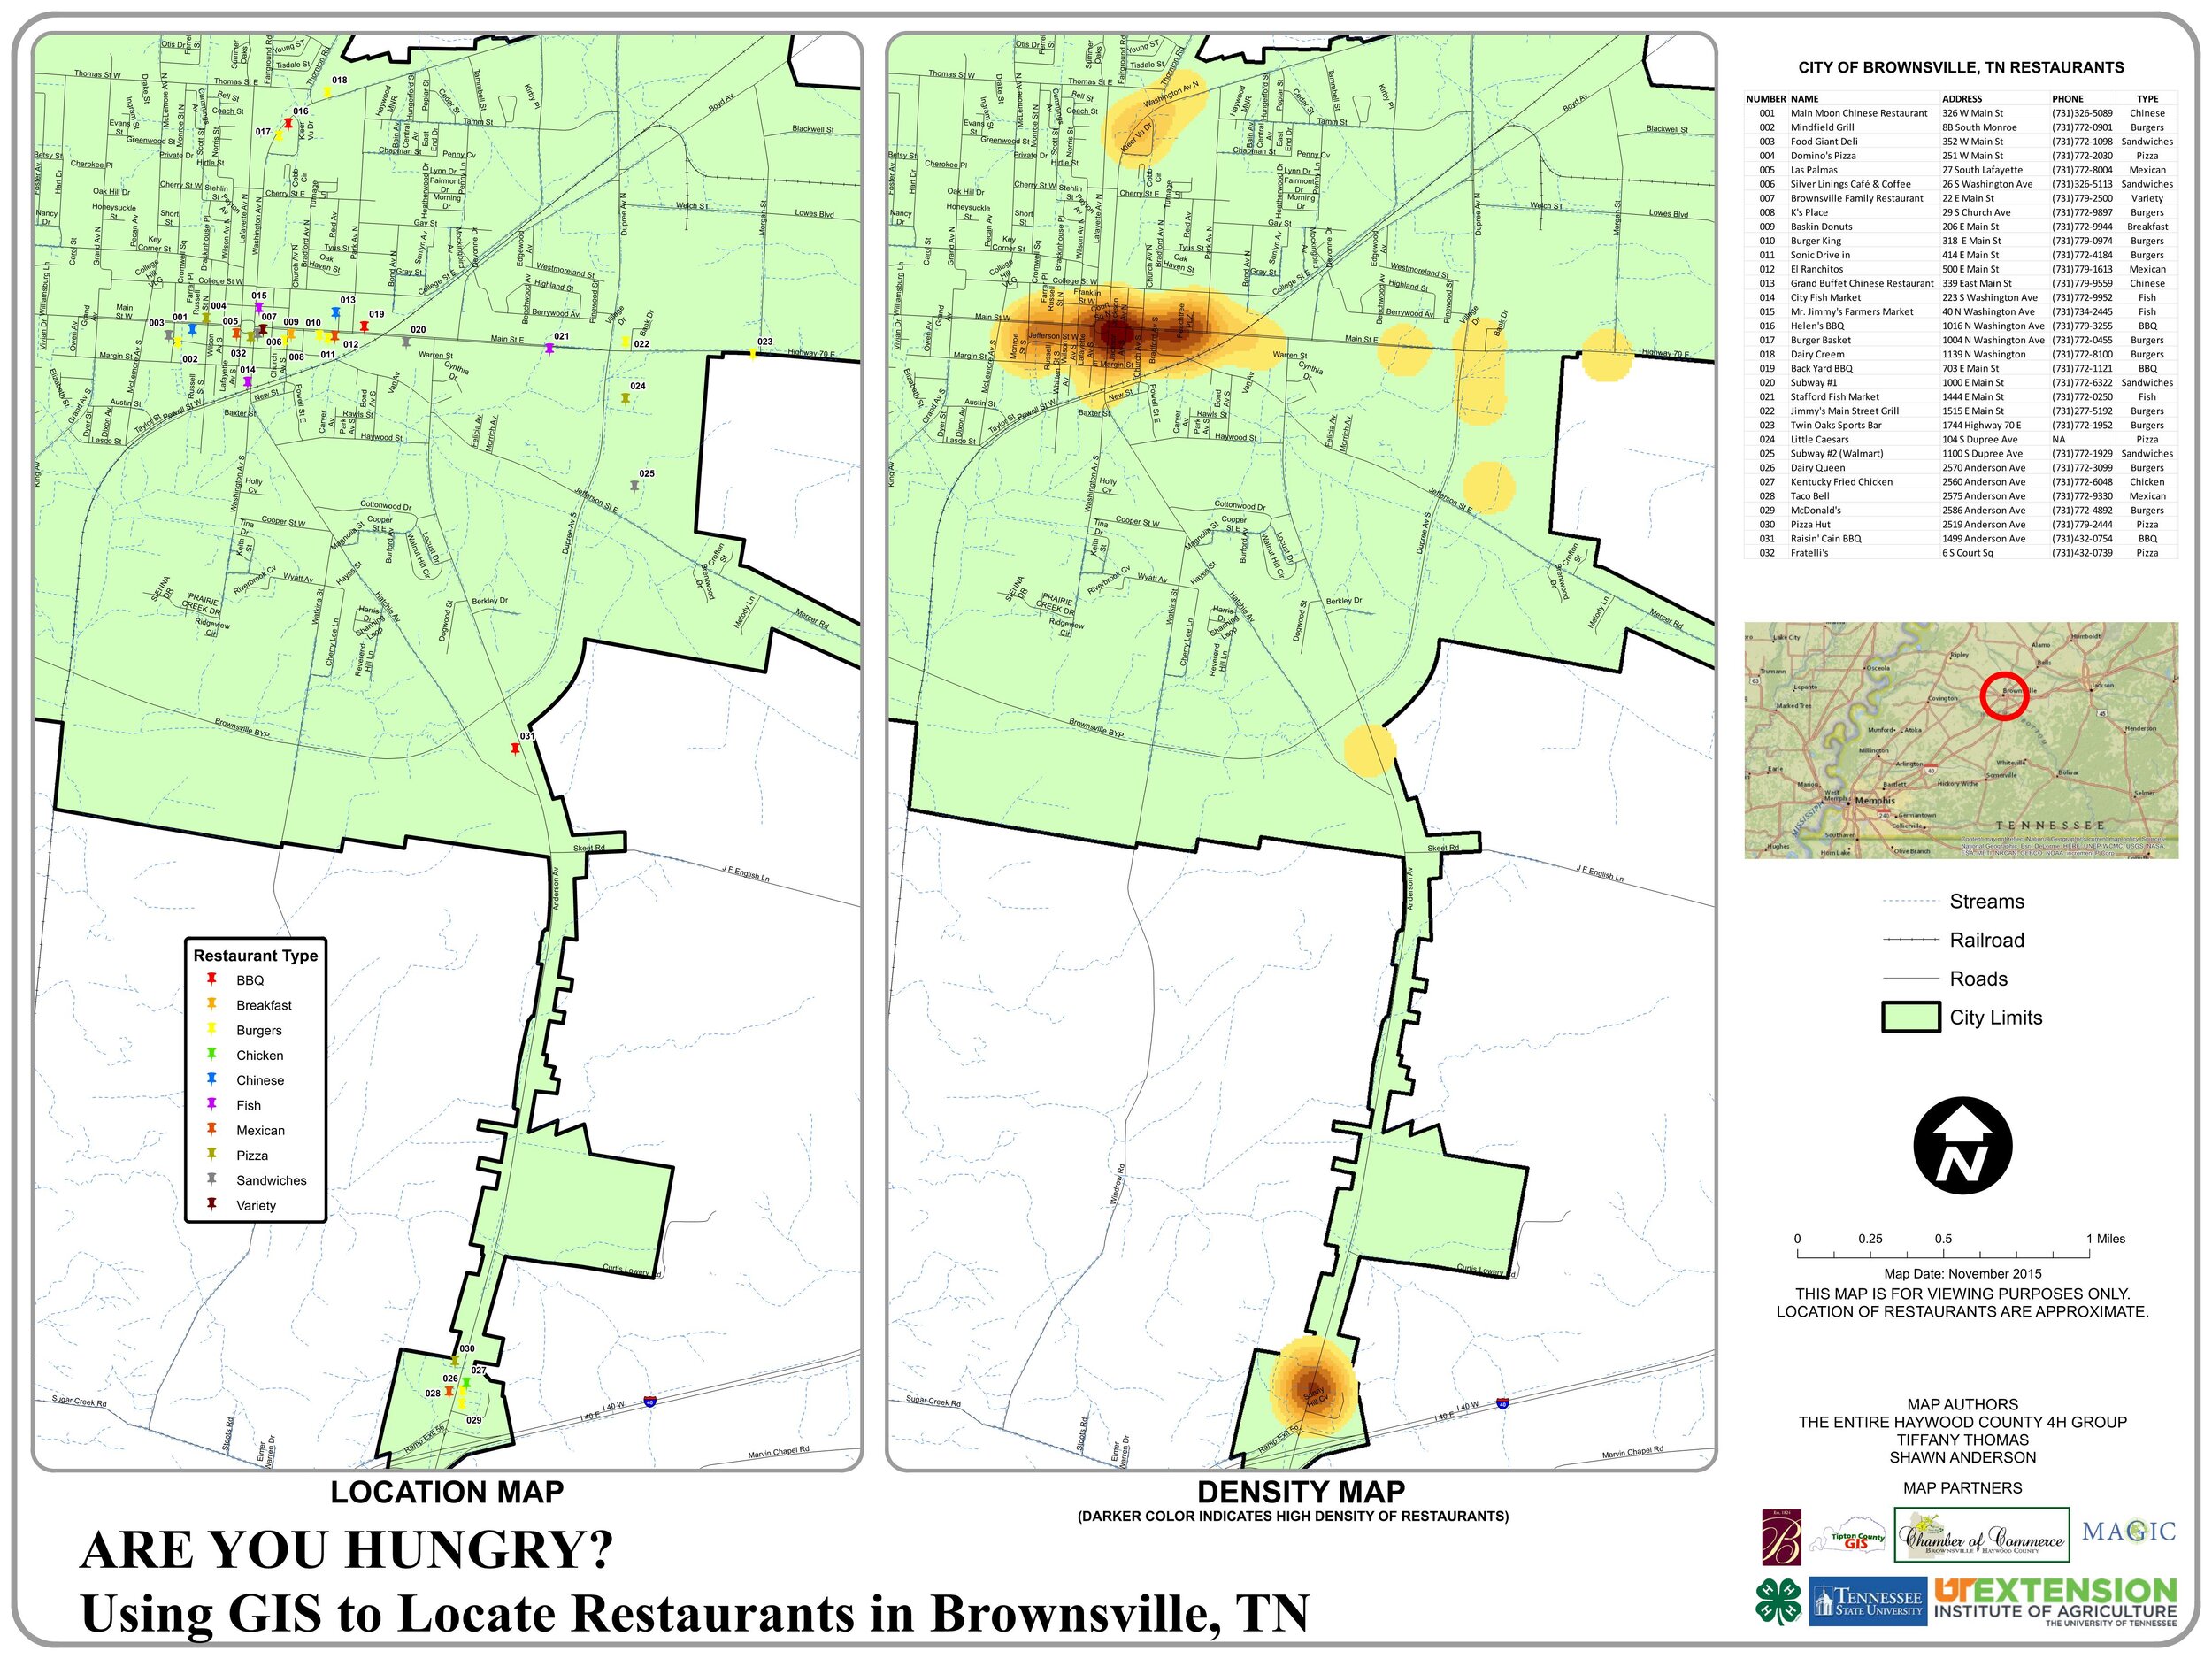 Are You Hungry? Using GIS to Locate Restaurants in Brownsville, TN